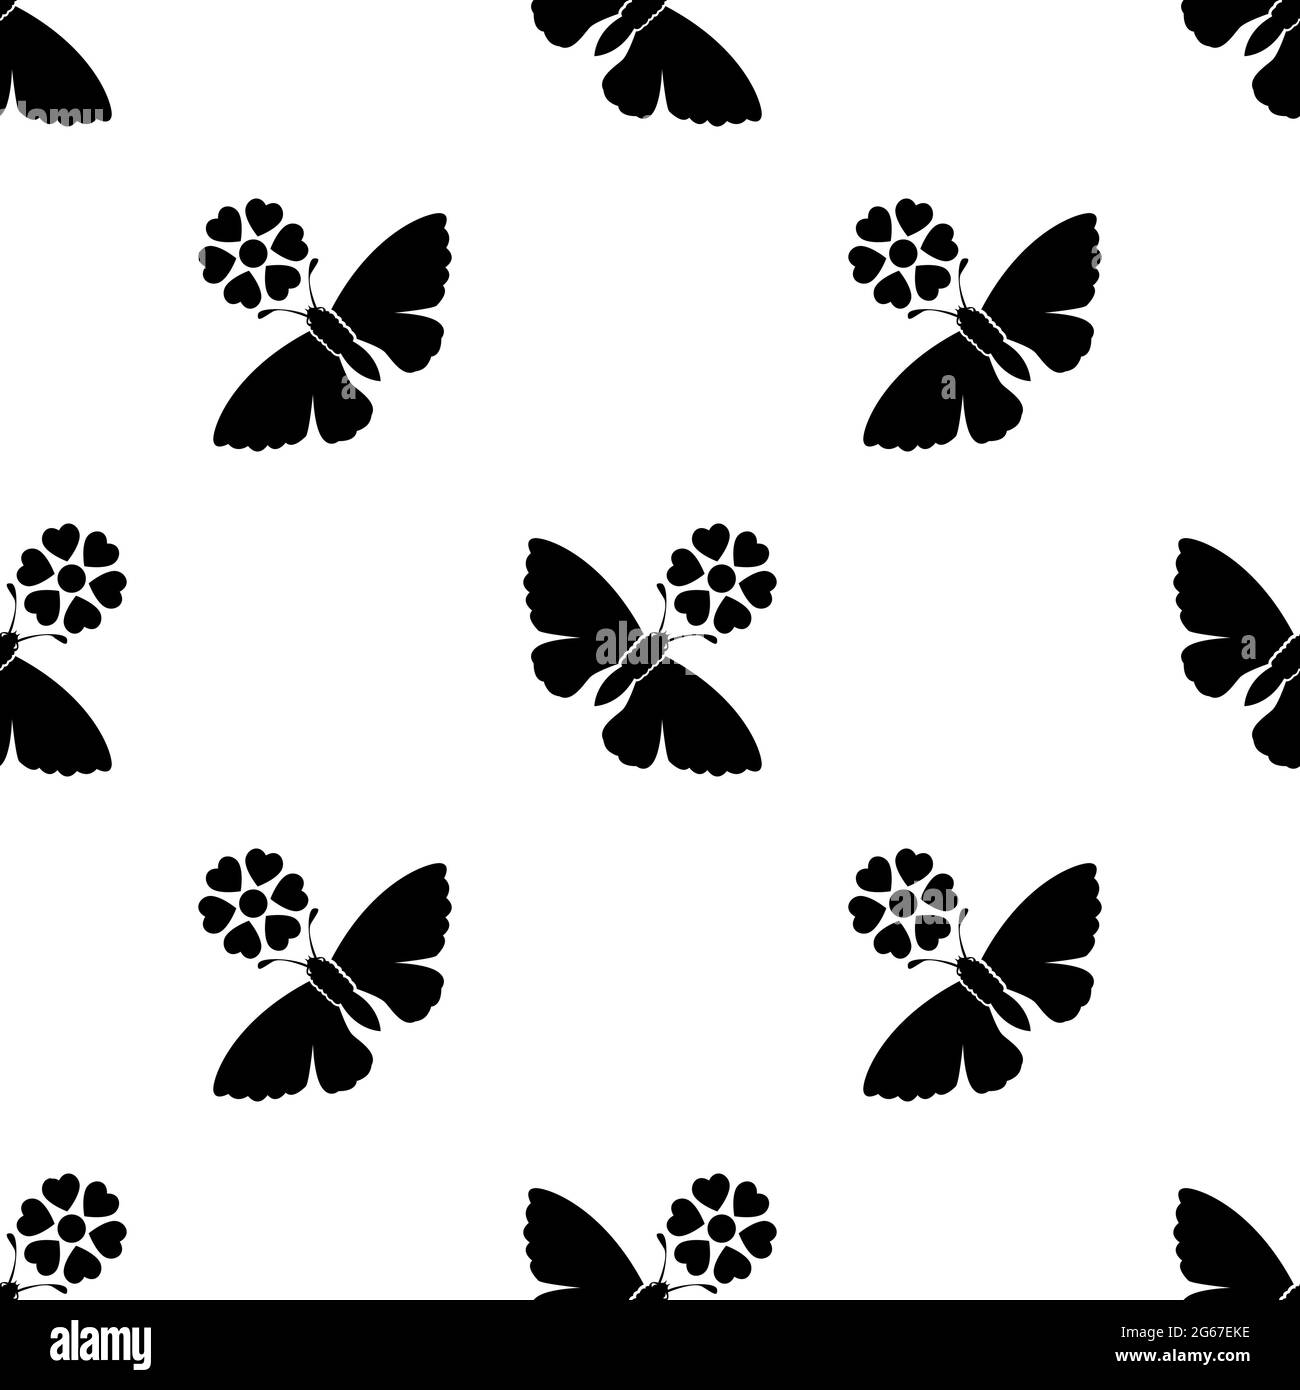 Butterfly silhouette flower Black and White Stock Photos & Images - Alamy